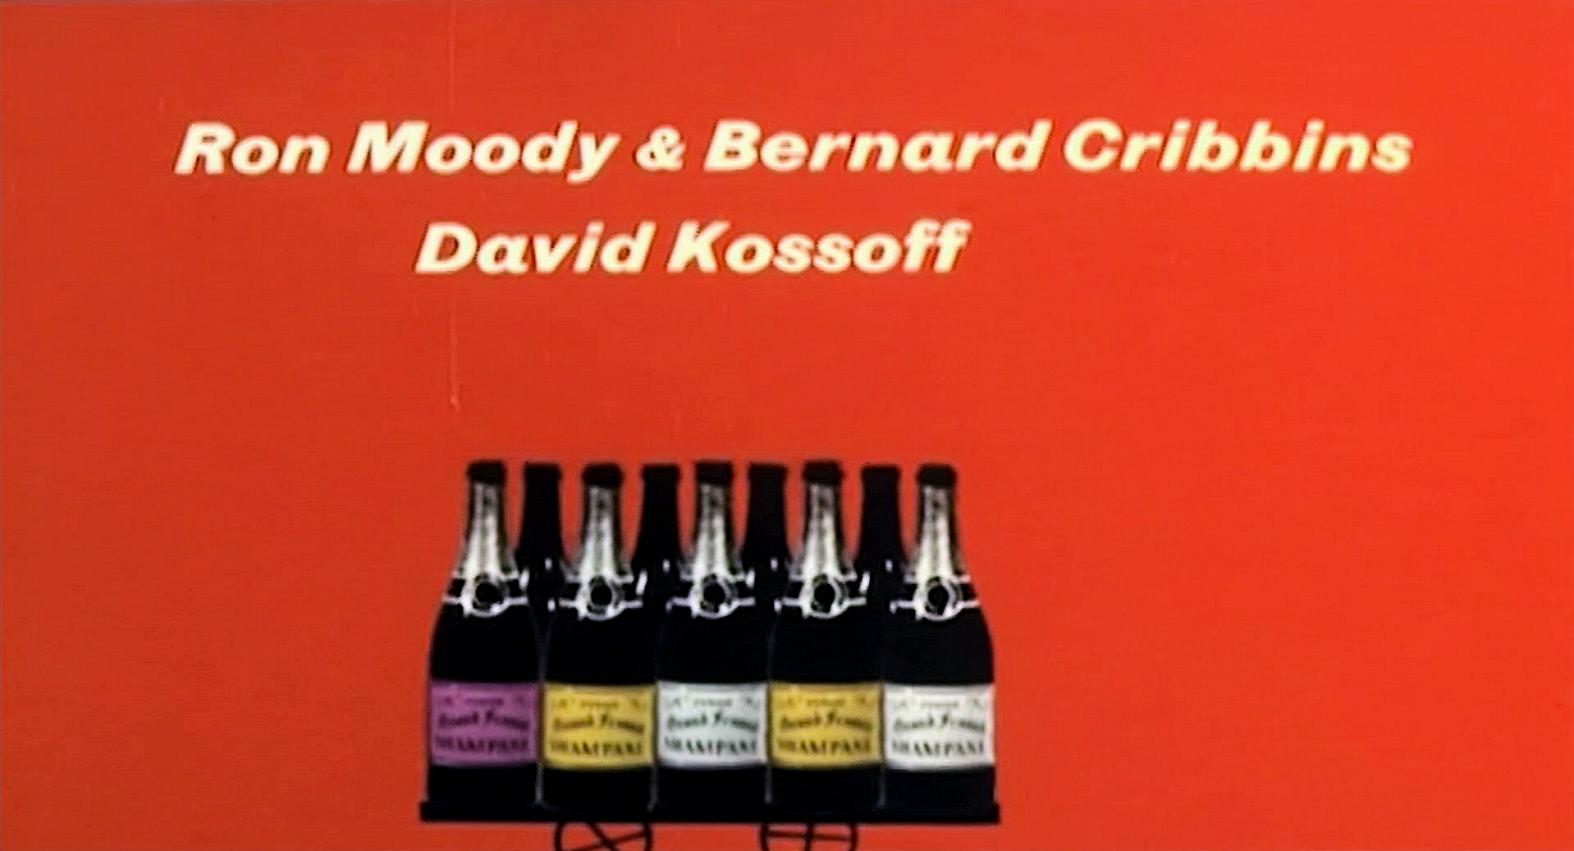 Main title from The Mouse on the Moon (1963) (4). Ron Moody and Bernard Cribbins, David Kossoff